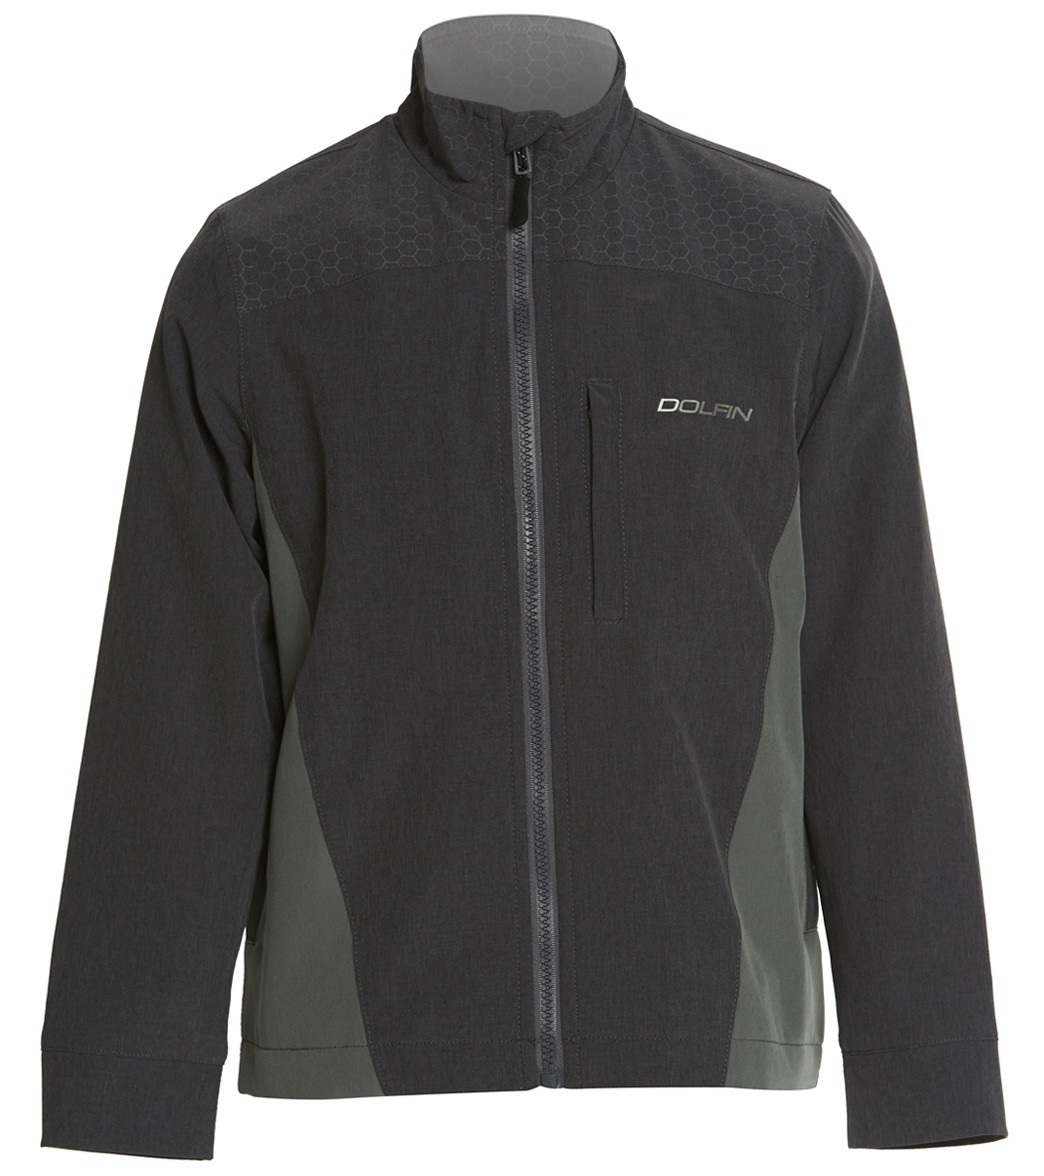 Dolfin Youth Warm-Up Jacket - Gray Large Polyester/Spandex - Swimoutlet.com